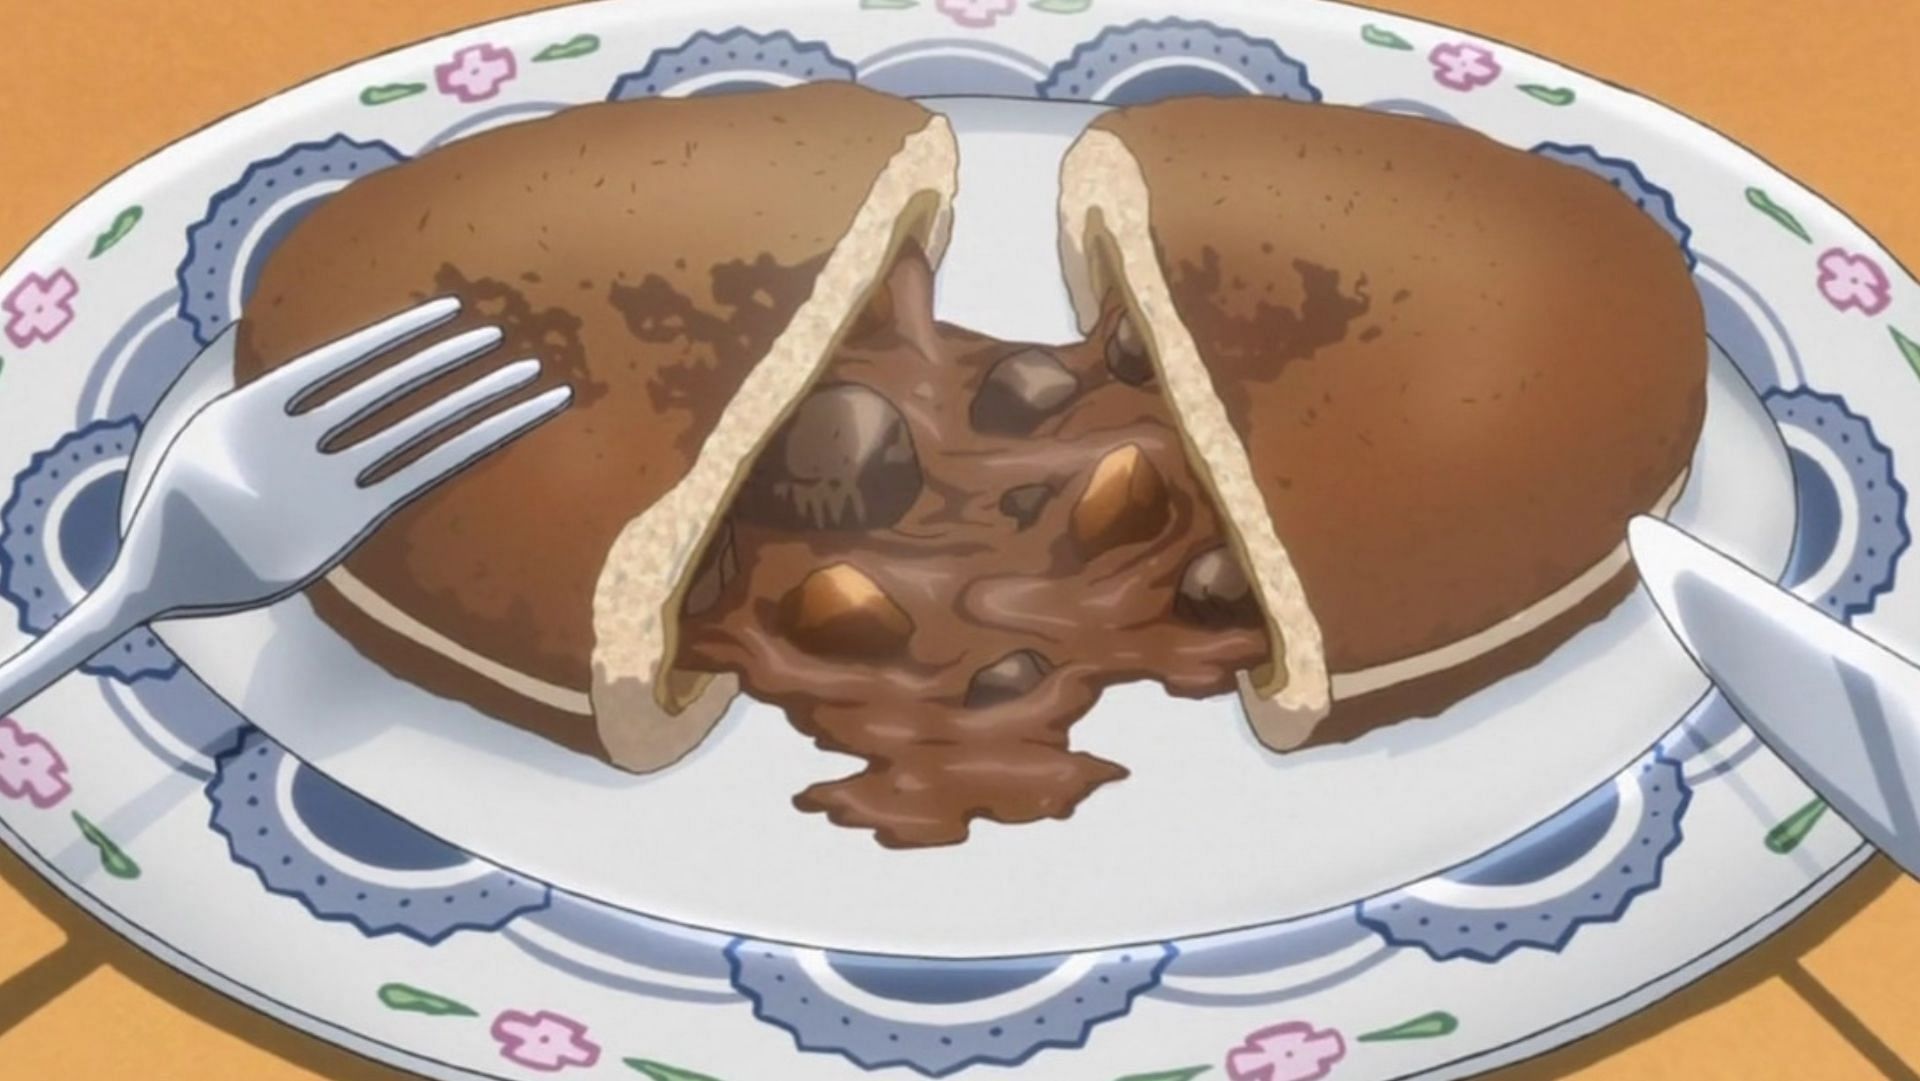 Chocolate Curry Bun (Image via A-1 Pictures)